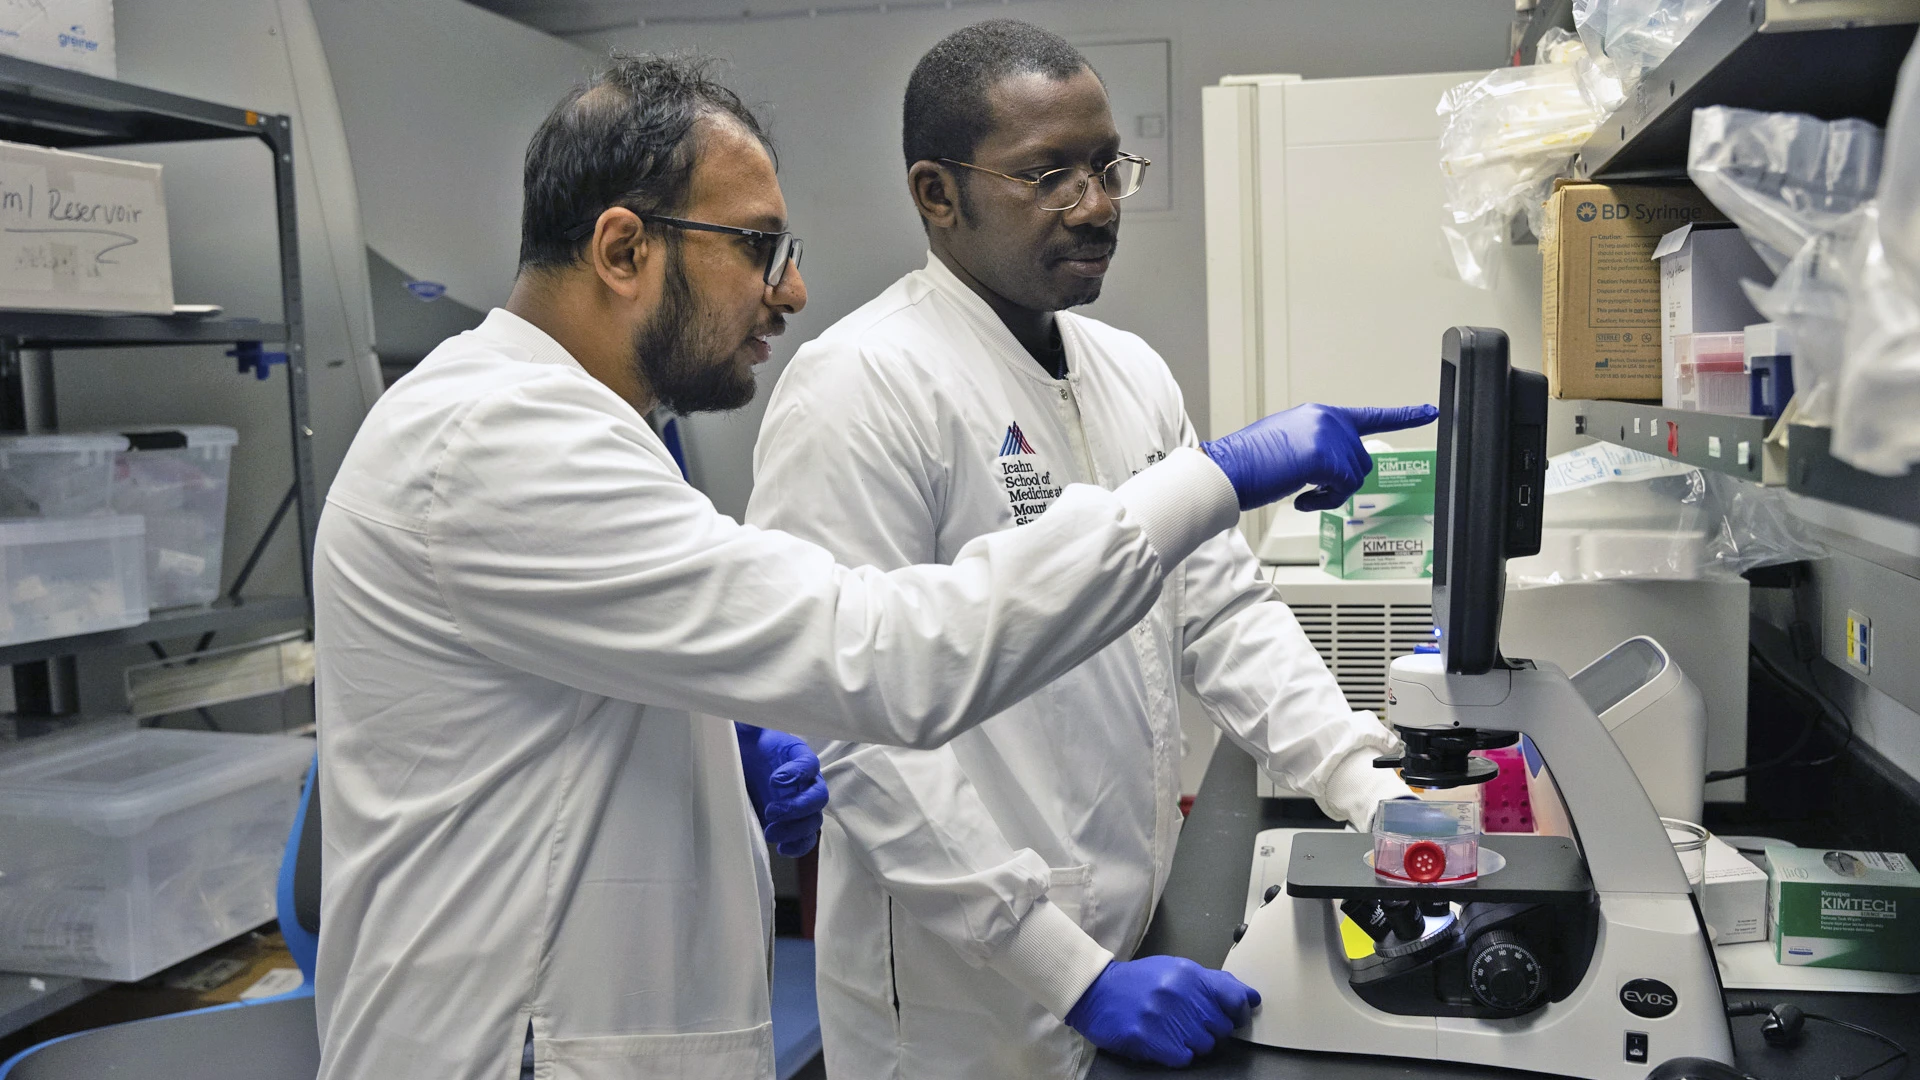 Dr. Bado (right) and Alam (left) pore through samples at the microscope, working on basic science of tumor senescence, but those findings will have great impact down the road on informing treatment strategies.